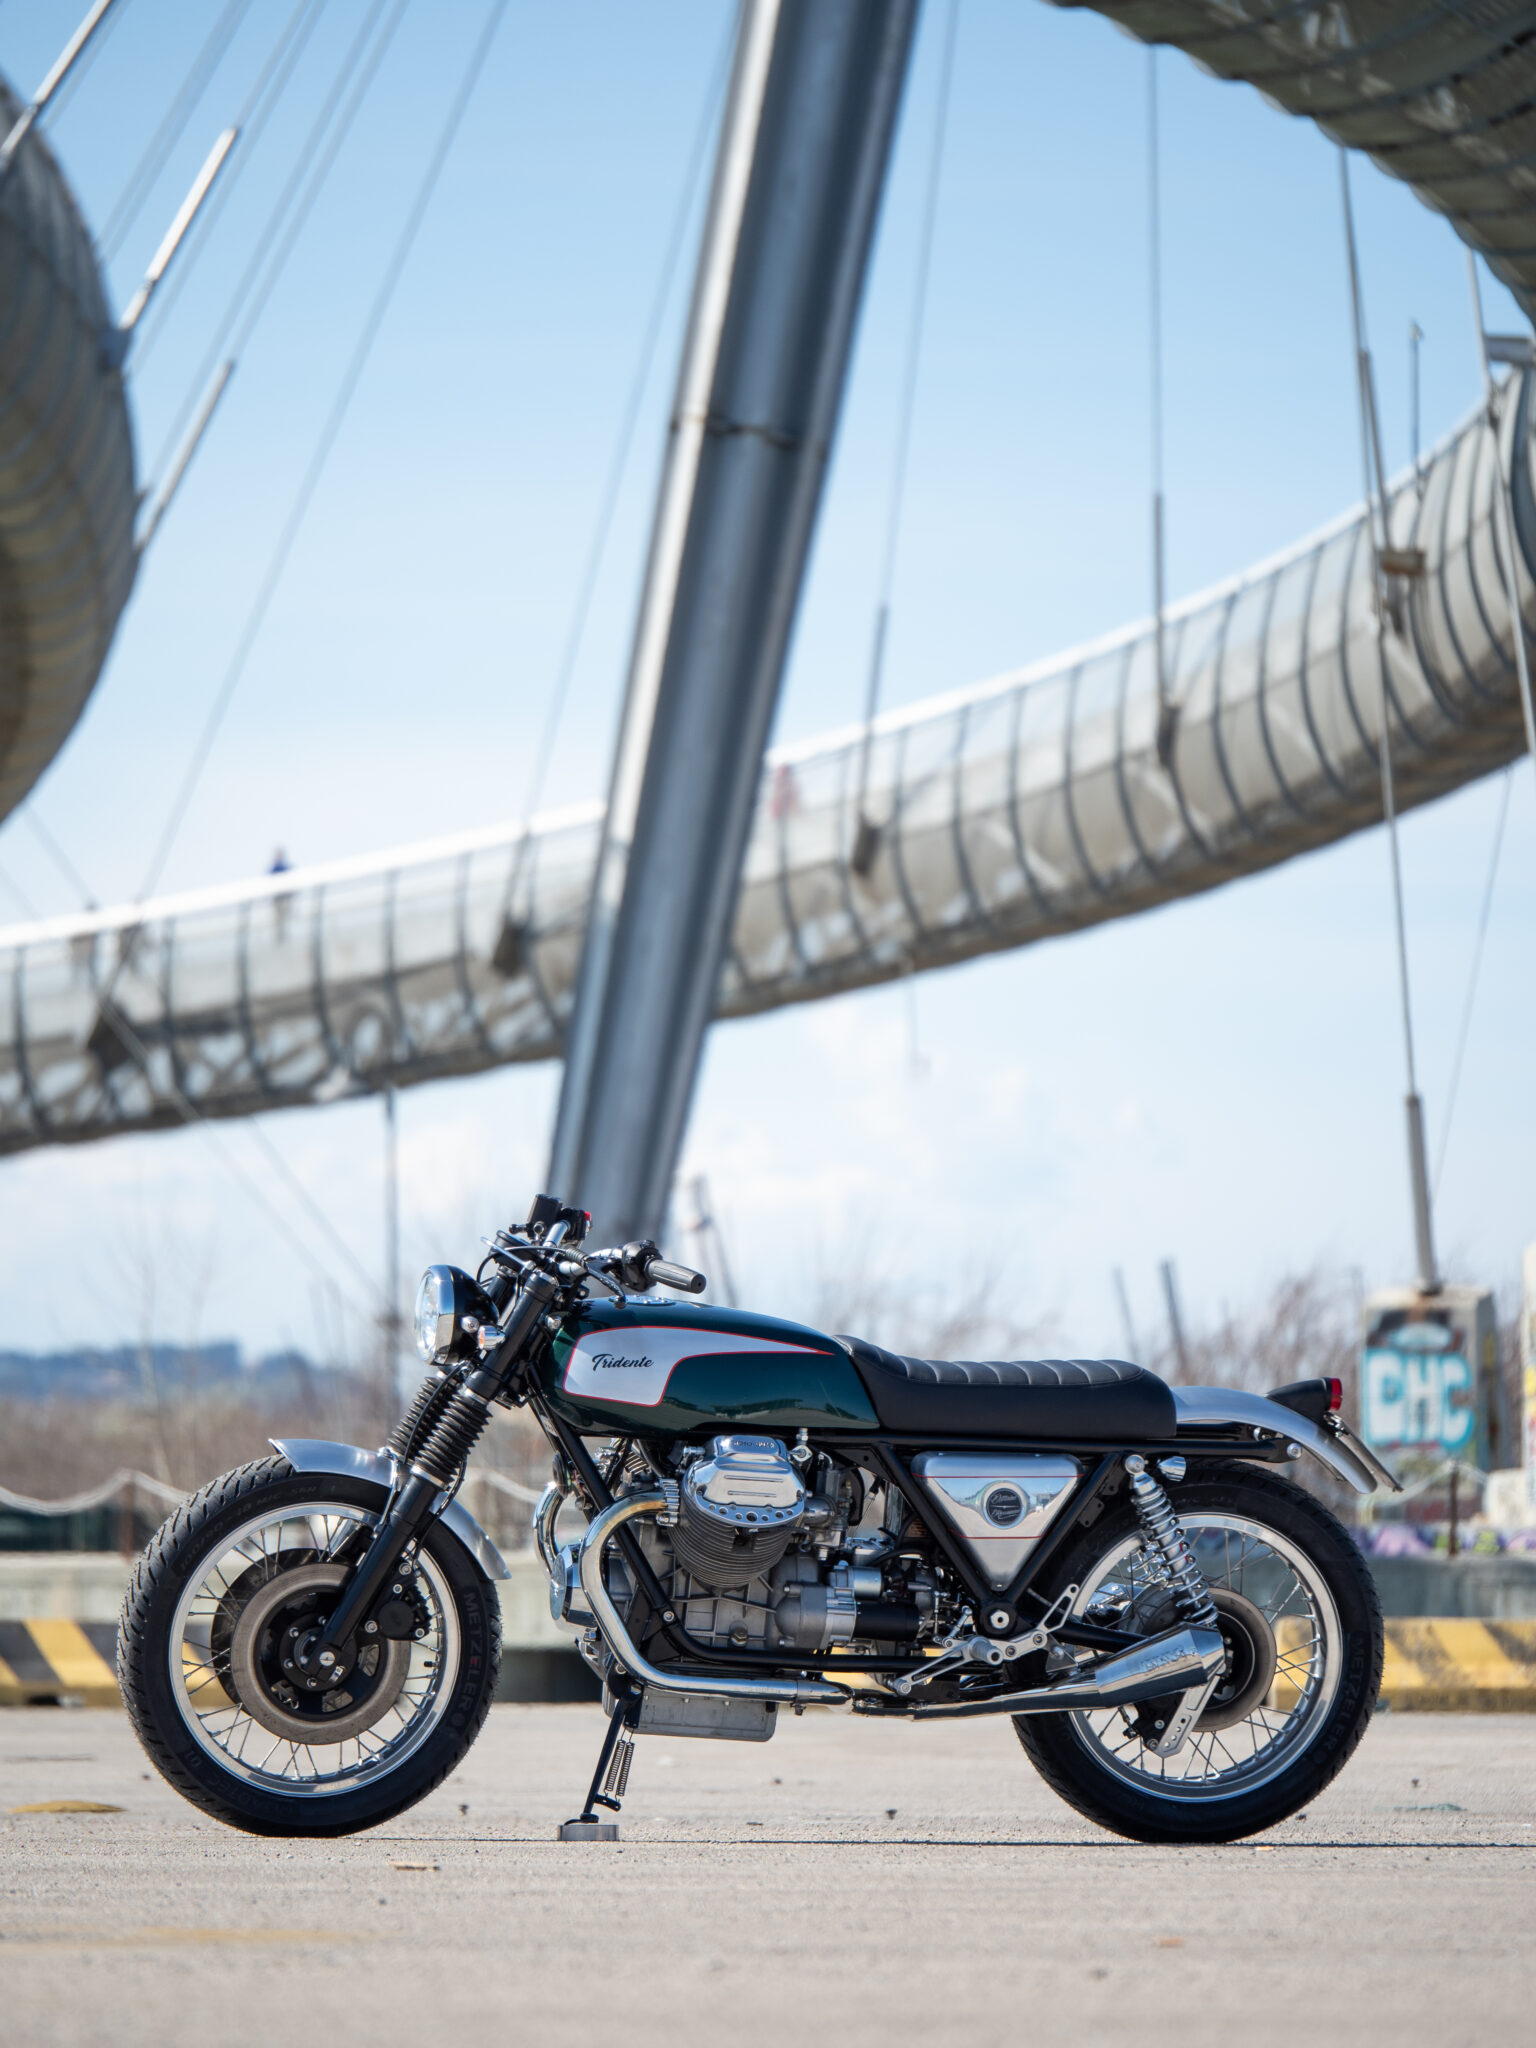 Italy's Officine Rossopuro with their Moto Guzzi SP1000 'Tridente' roadster